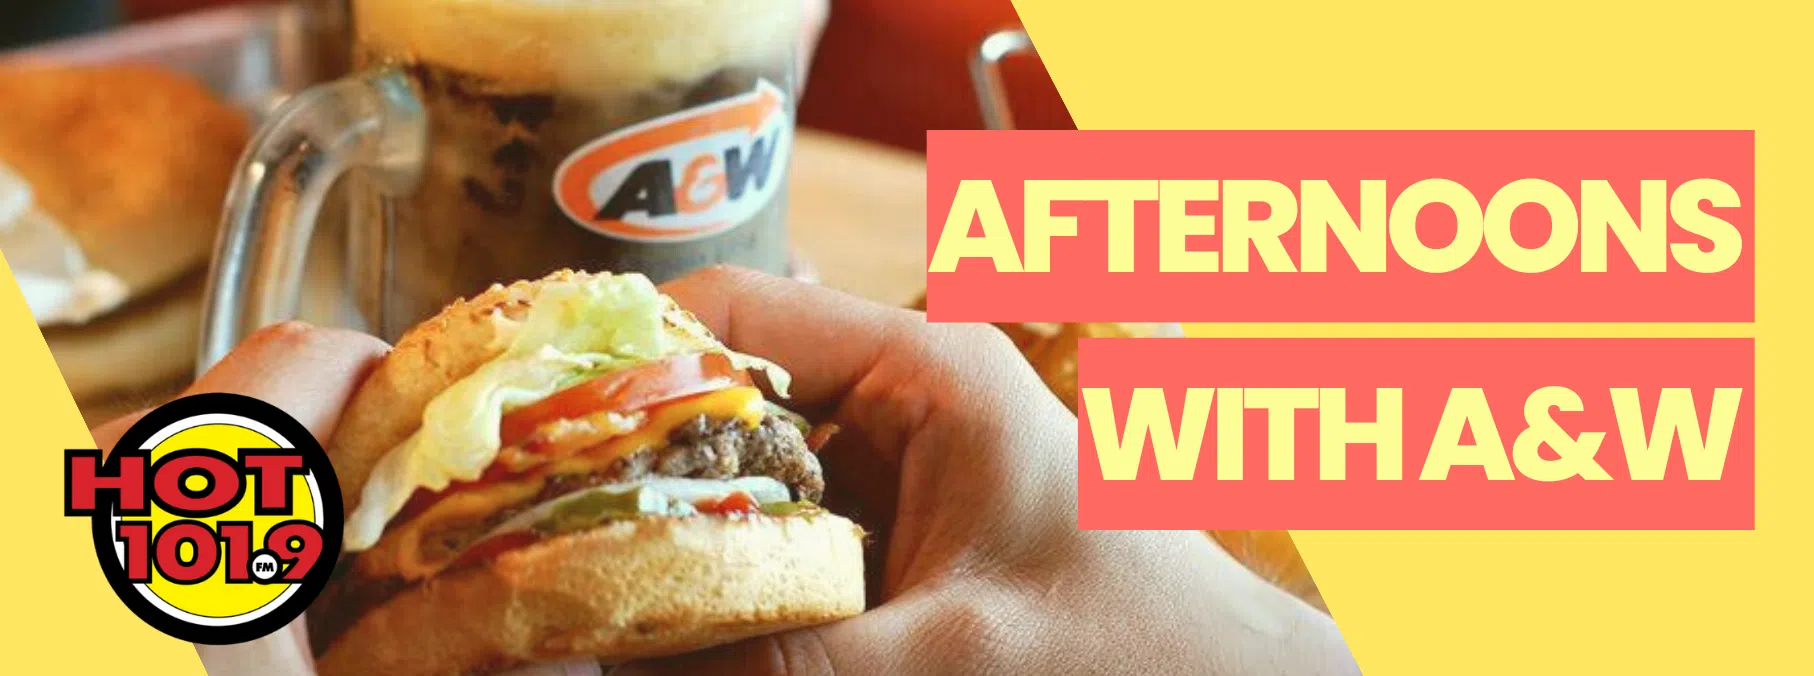 AFTERNOON FUN WITH A&W